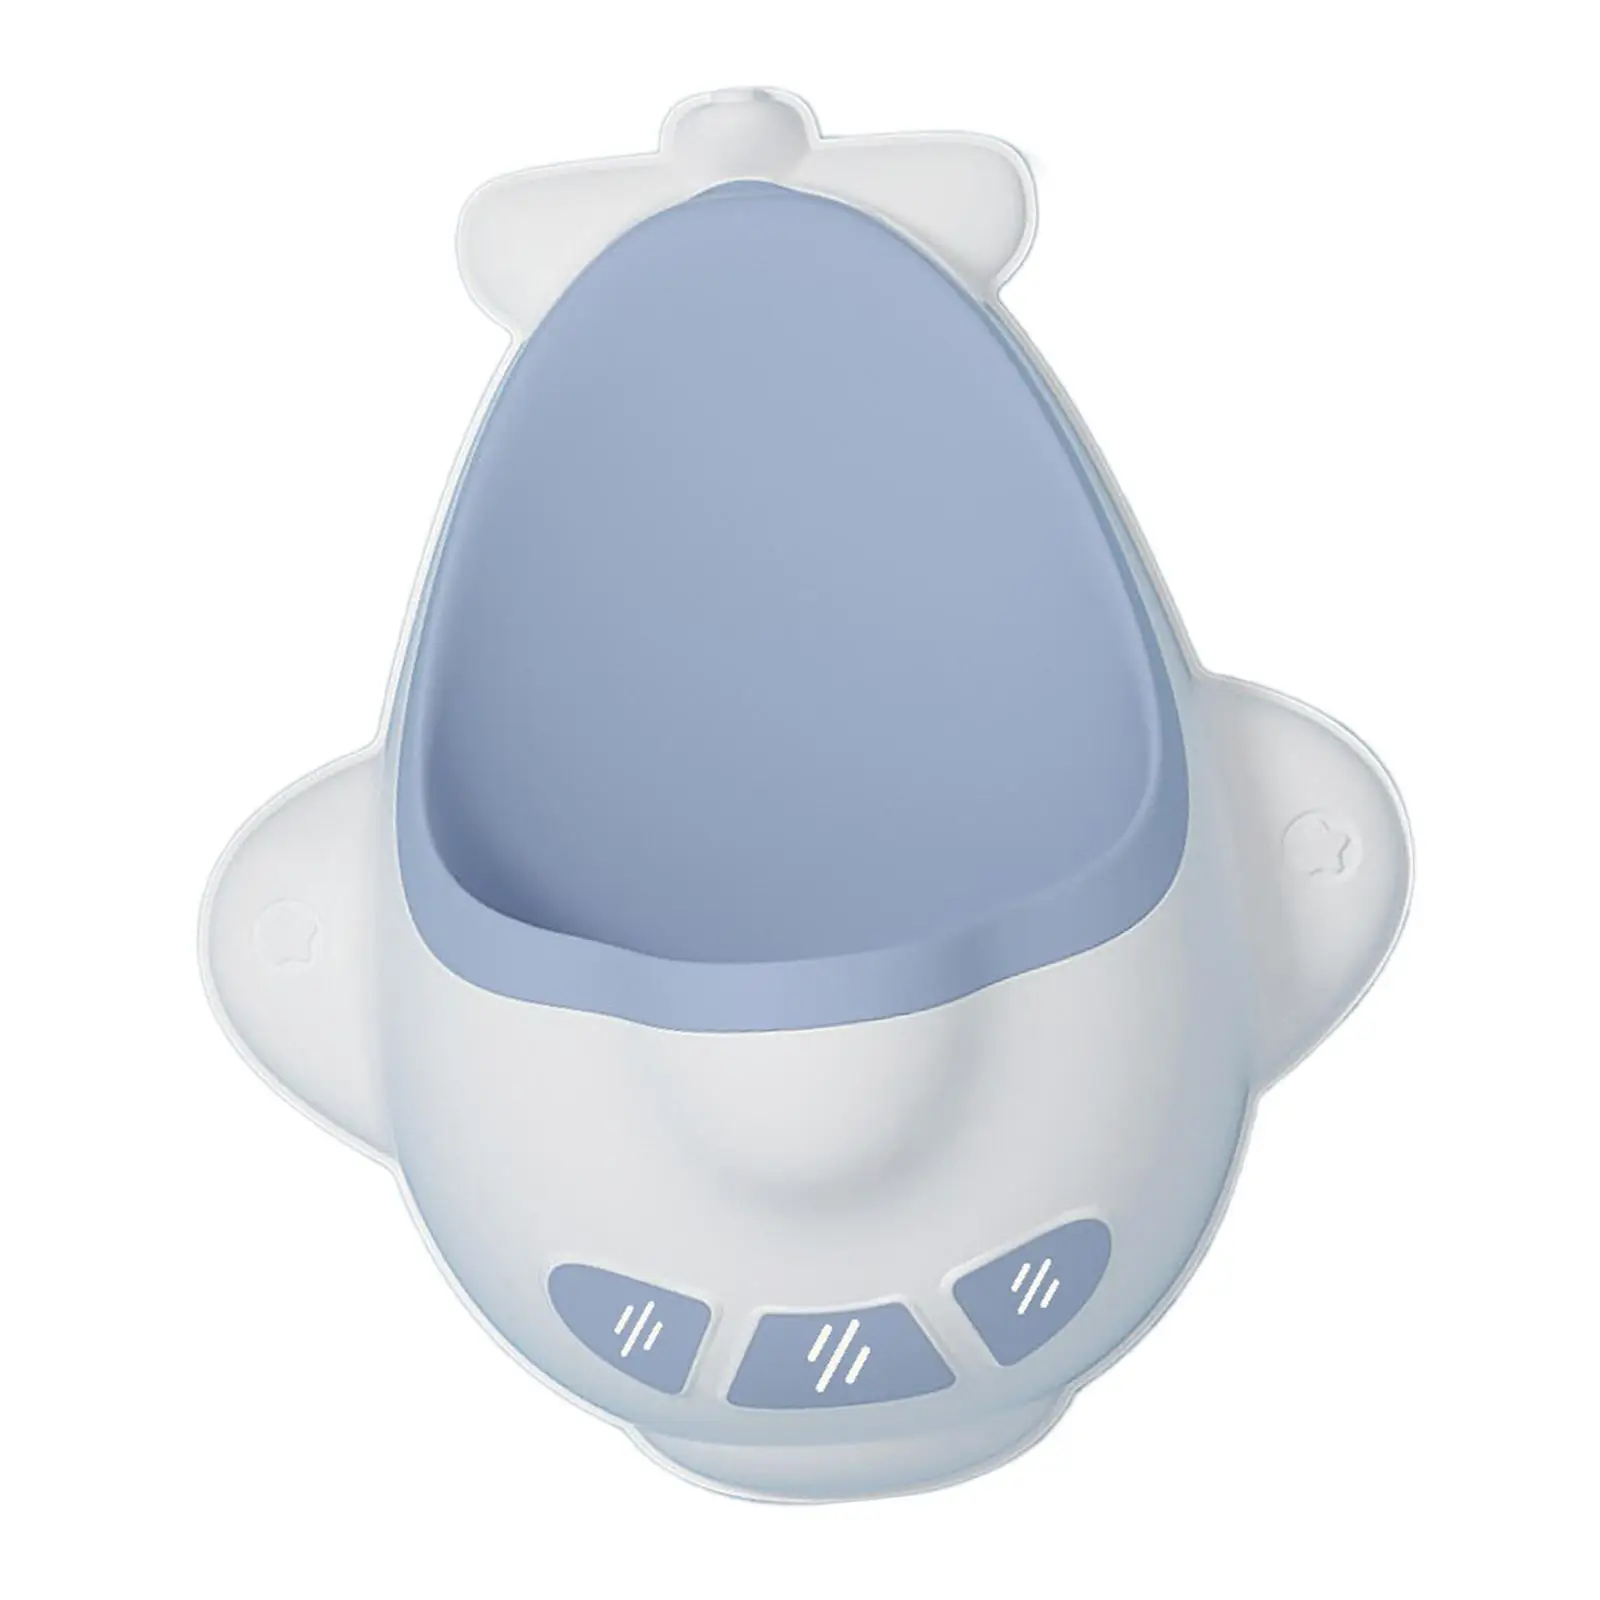 Boys Urinal Potty with Removable Bowl Insert Quick Cleaning